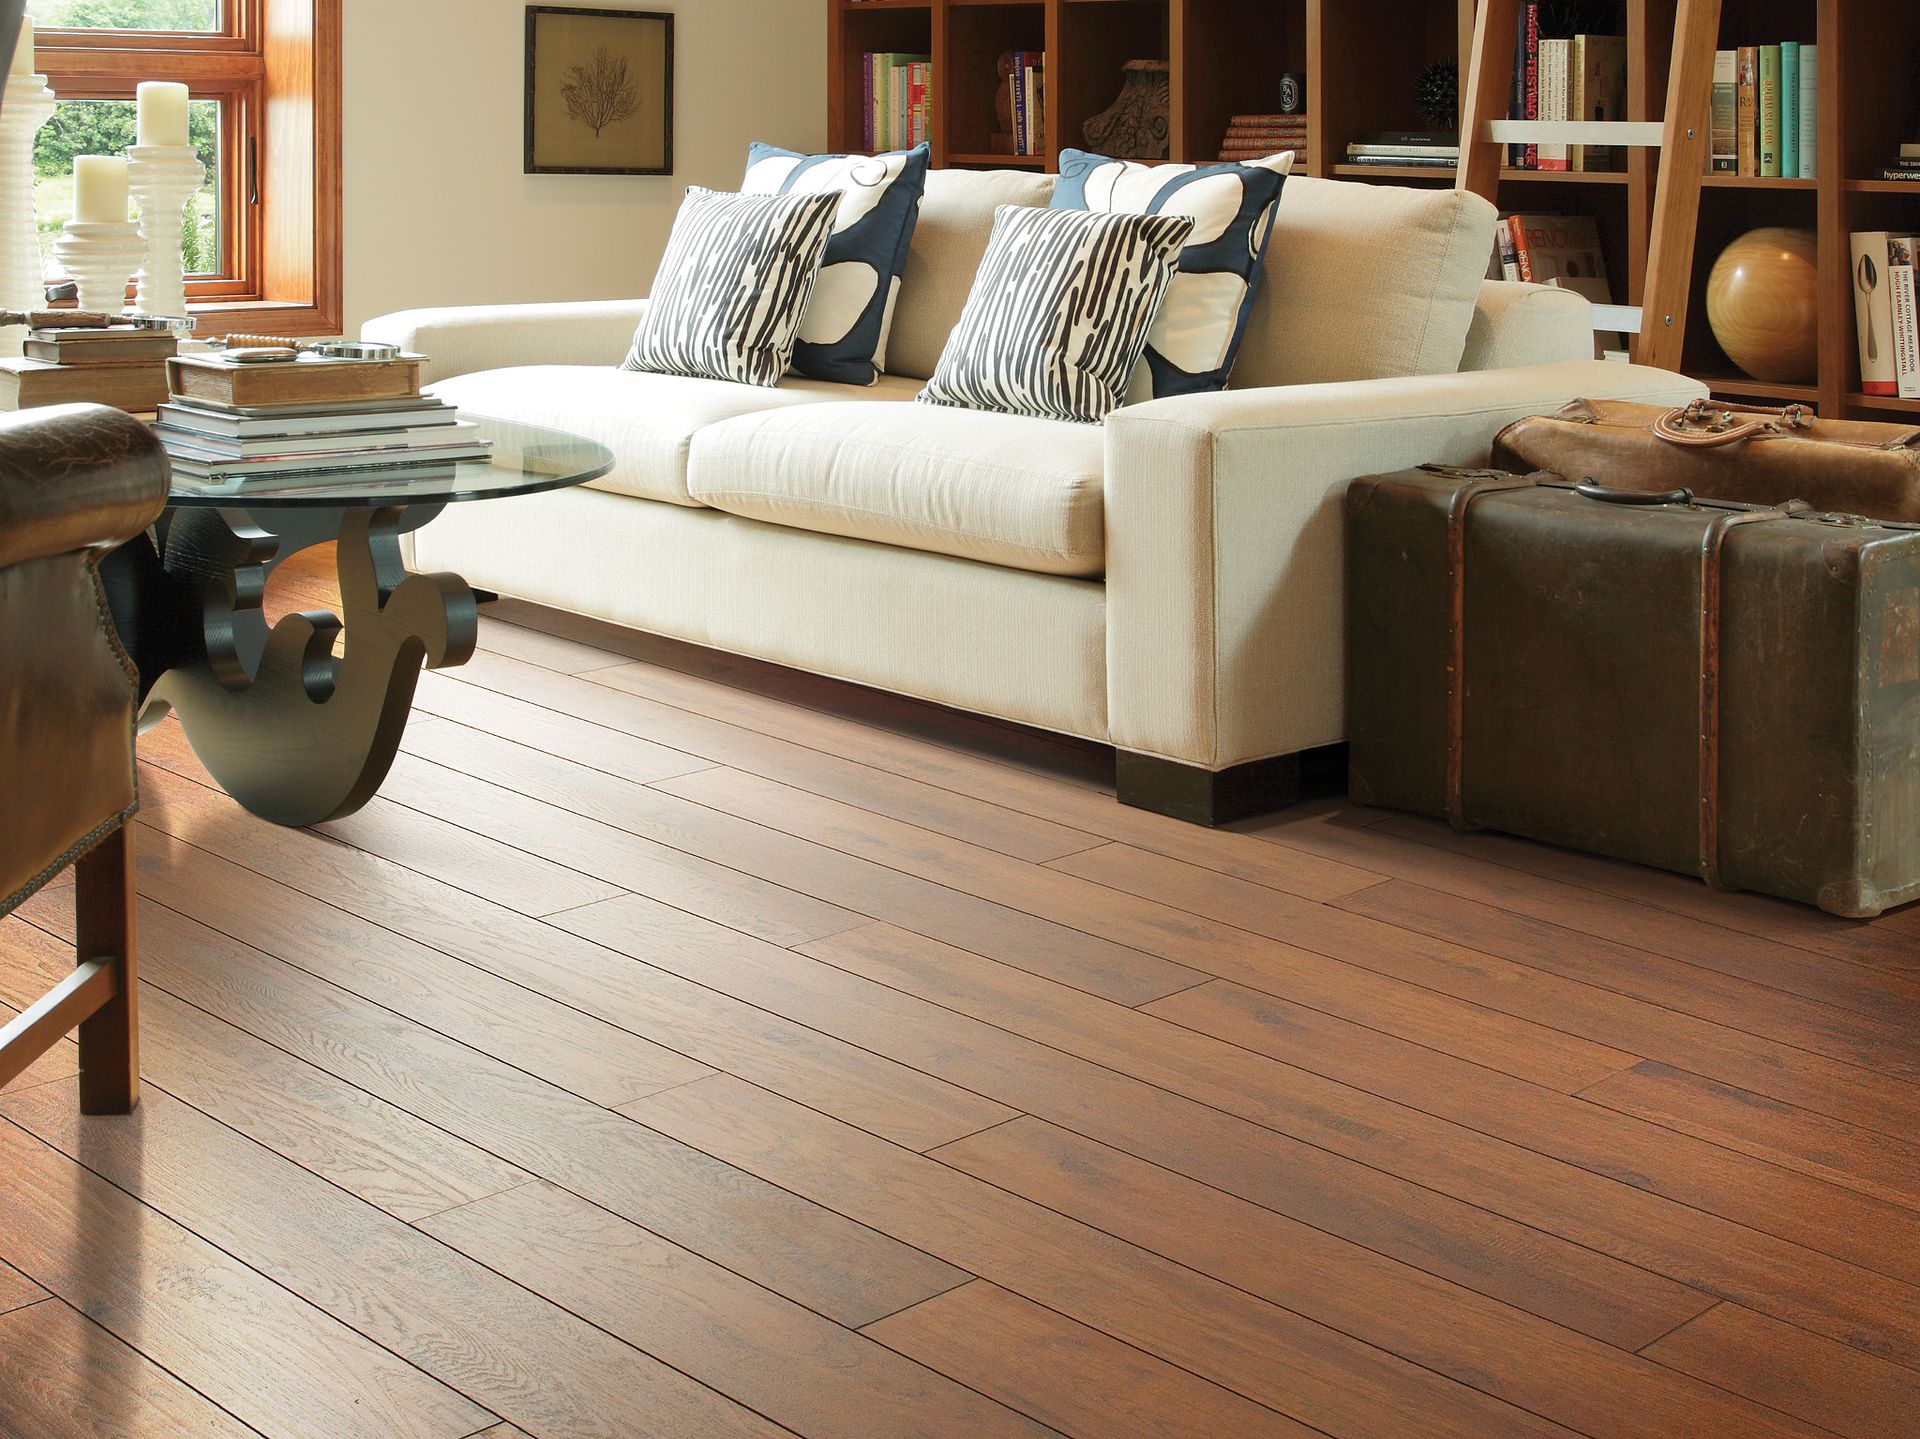 How to Clean Laminate Floors to Protect Their Shiny Finish